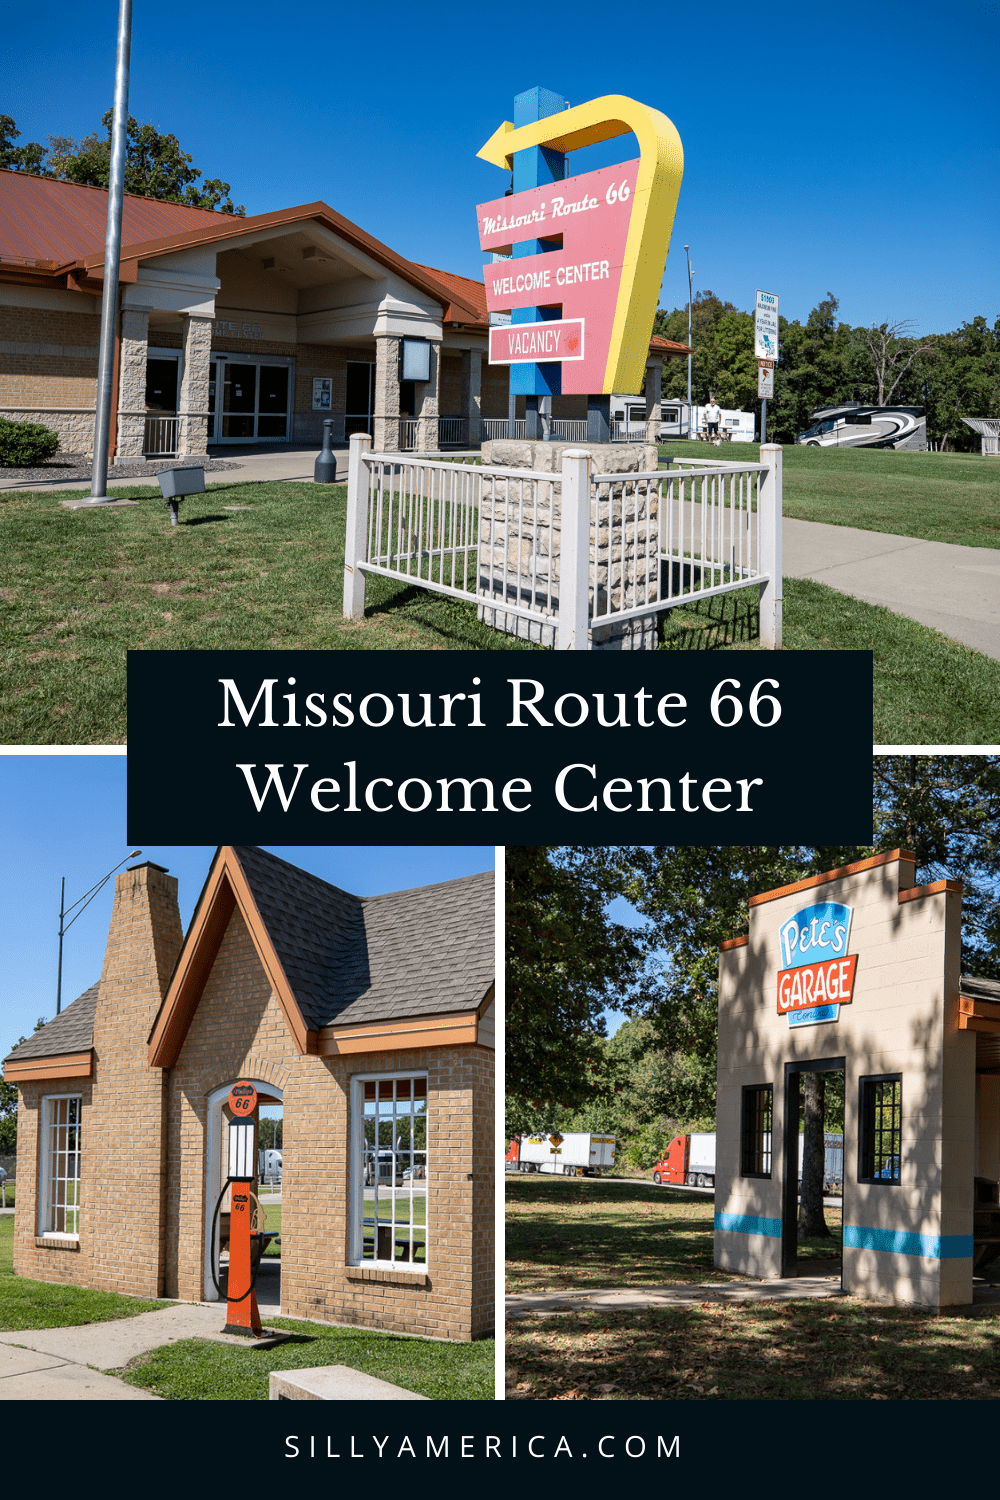 Travel old Route 66 without leaving Missouri...and get some snacks and a bathroom break while you’re there. The Missouri Route 66 Welcome Center in Conway has a definitive theme alongside their amenities. Visit this Route 66 themed rest stop in Missouri on your next road trip.  #RoadTrips #RoadTripStop #Route66 #Route66RoadTrip #MissouriRoute66 #Missouri #MissouriRoadTrip #MissouriRoadsideAttractions #RoadsideAttractions #RoadsideAttraction #RoadsideAmerica #RoadTrip